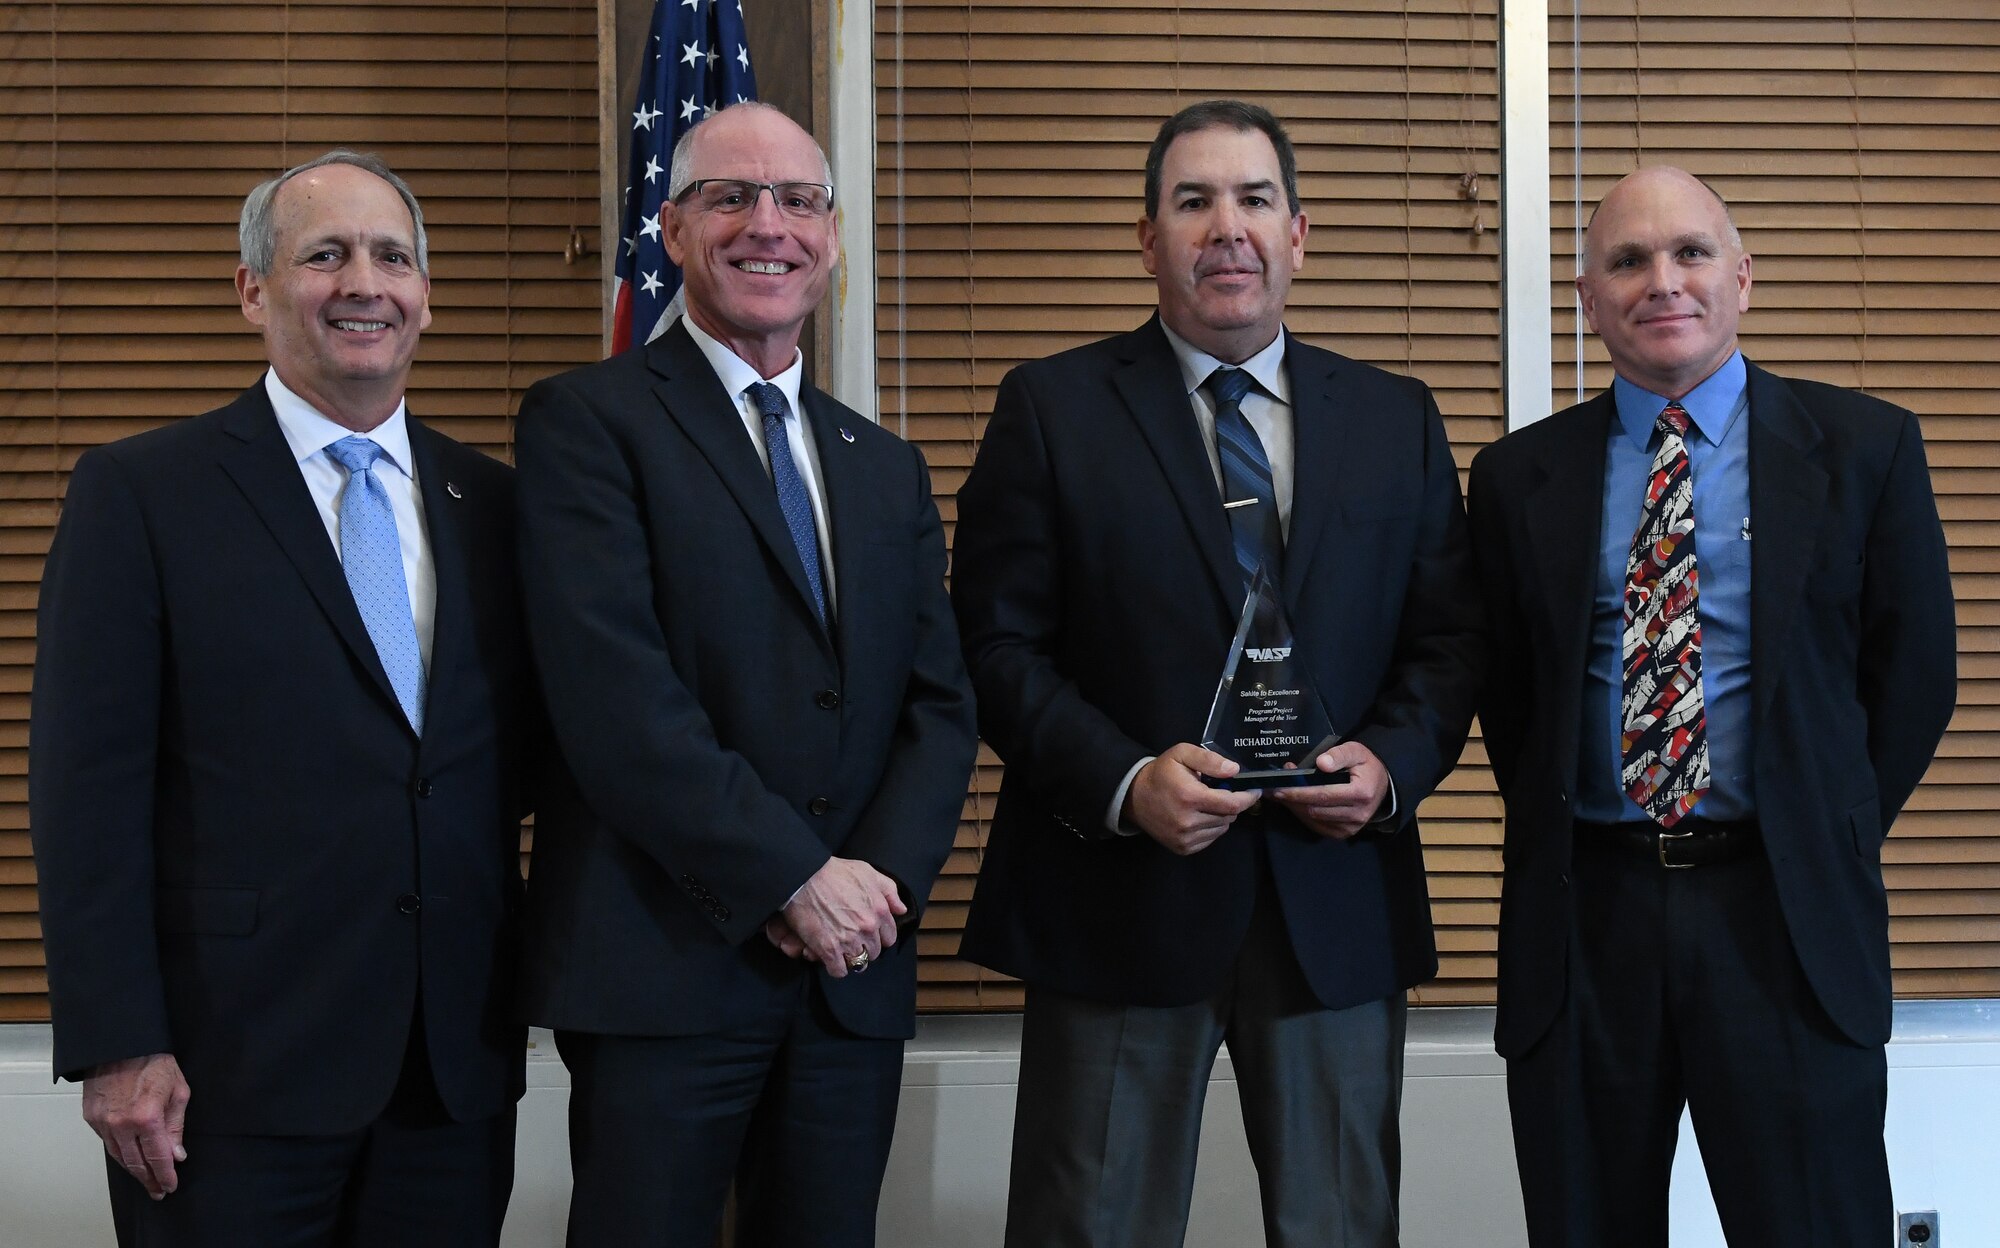 Capital Projects Manager Richard Crouch, third from the left, receives the Program/Project Manager of the Year award during the National Aerospace Solutions (NAS), LLC, Salute to Excellence Annual Awards Banquet, Nov. 5, 2019, at the Arnold Lakeside Center, Arnold Air Force Base, Tenn. Also pictured, from left, is NAS Deputy General Manager Michael Belzil, NAS General Manager Dr. Richard Tighe and NAS Base Operations and Support Director Ronnie Skipworth. (U.S. Air Force photo by Jill Pickett)